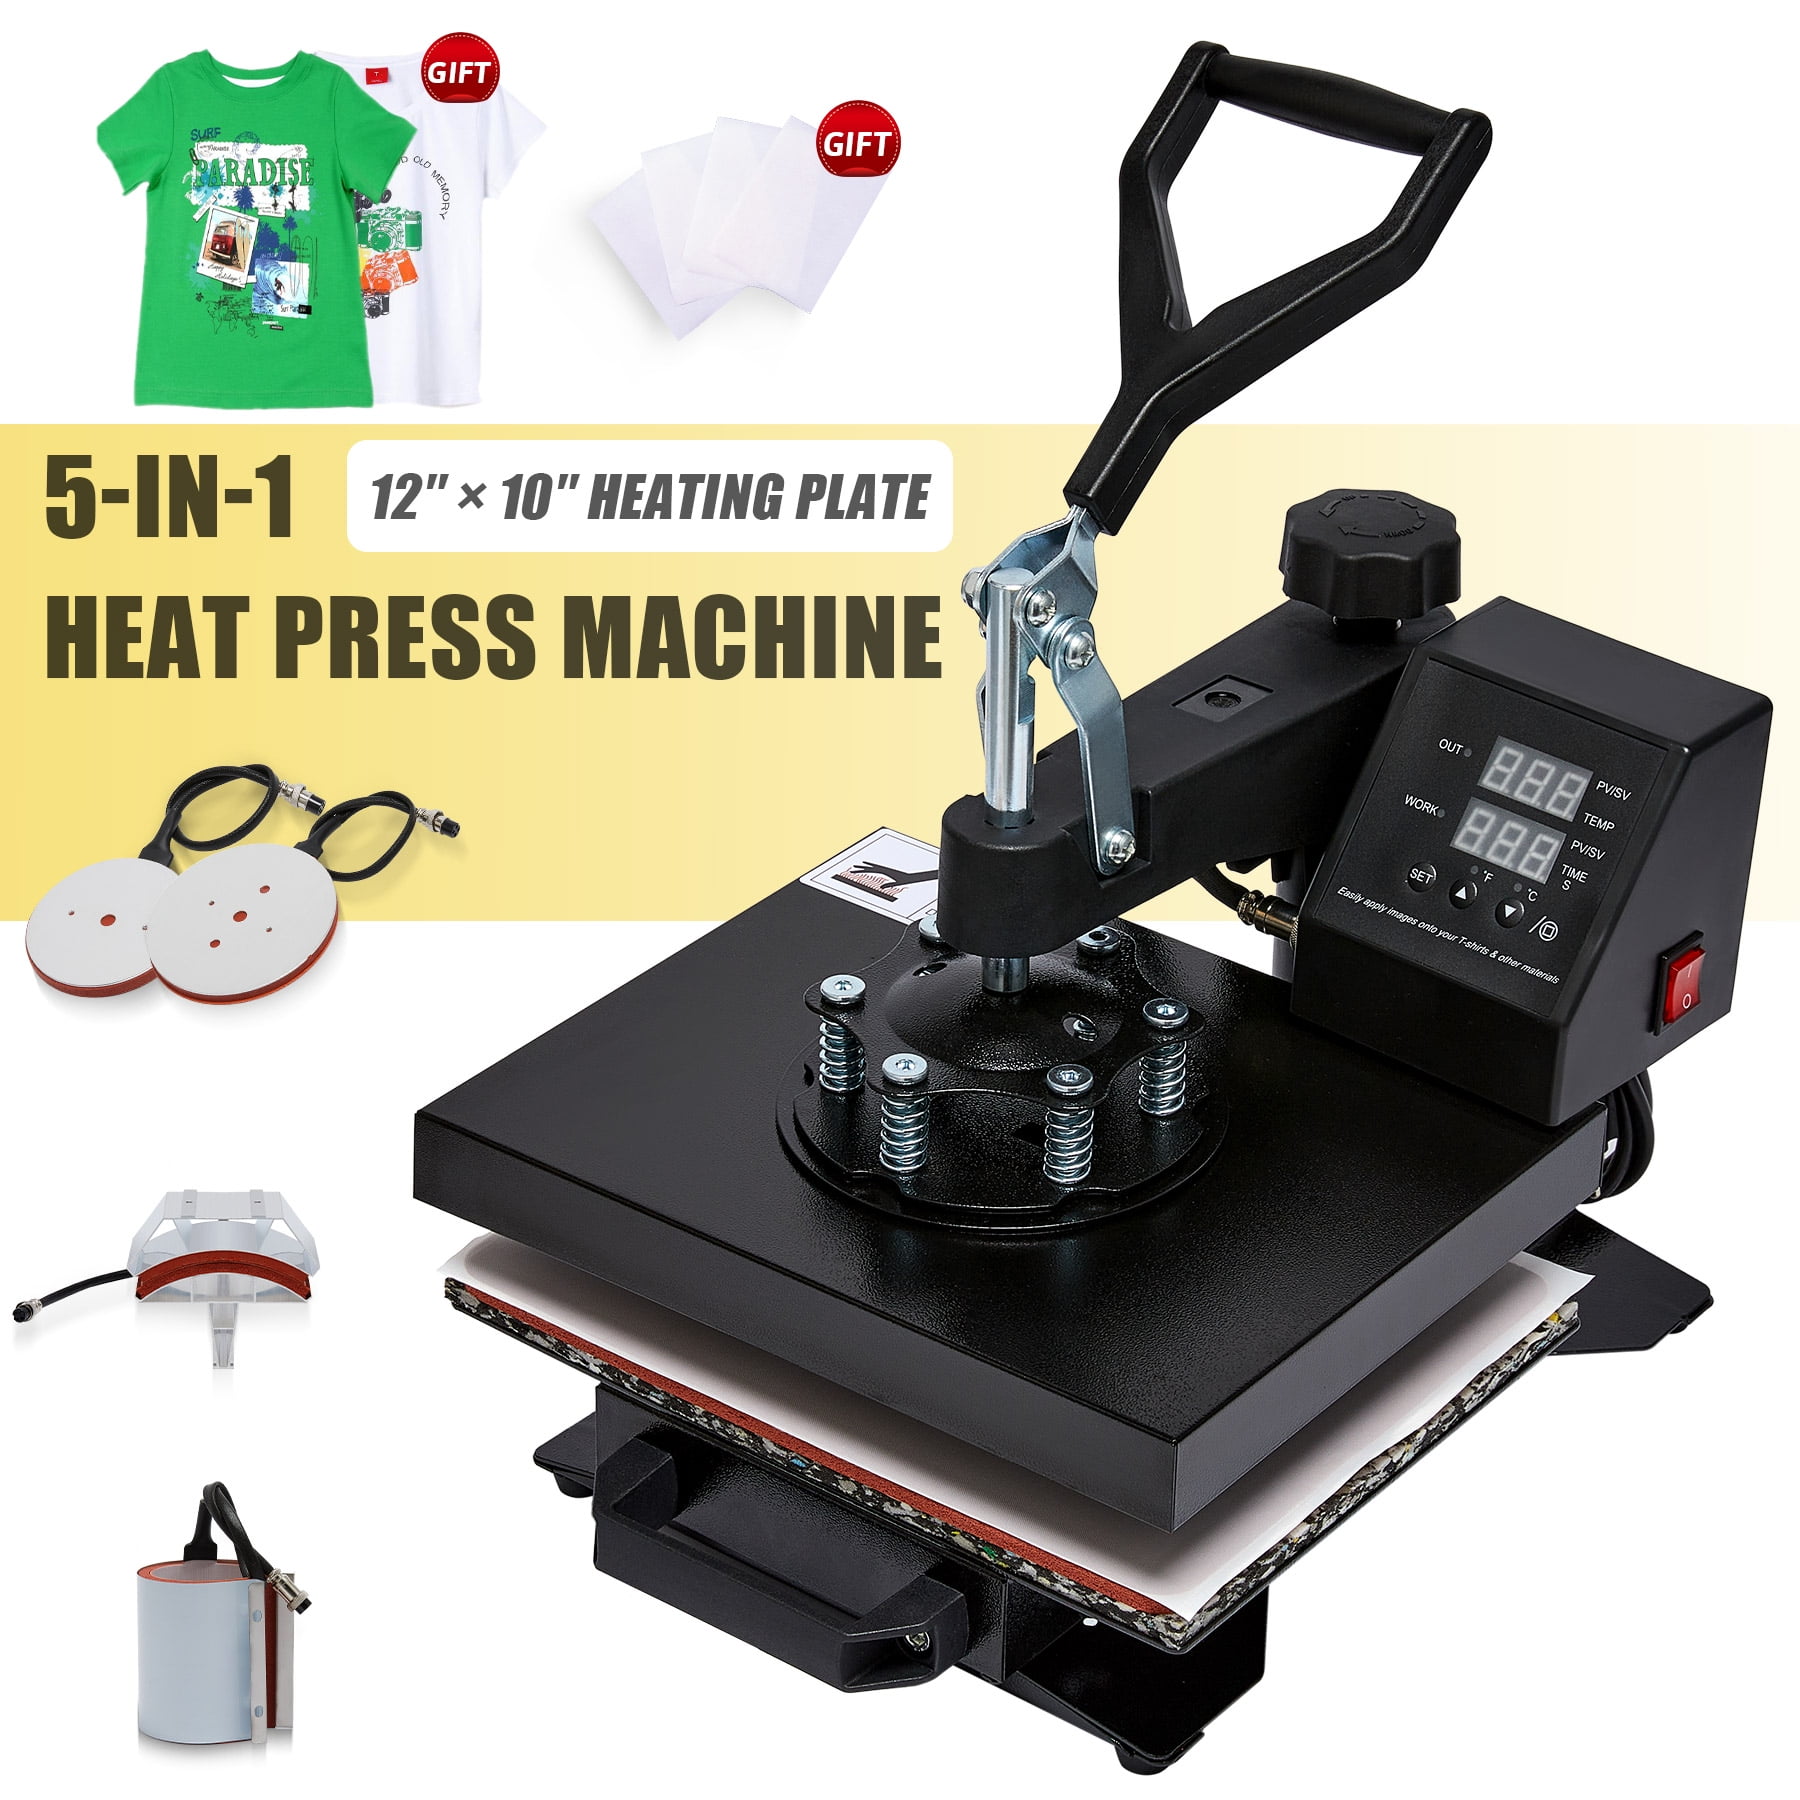 110V Electric Rosin Press Machine Stamper Manual Operation Double Plates Heating 